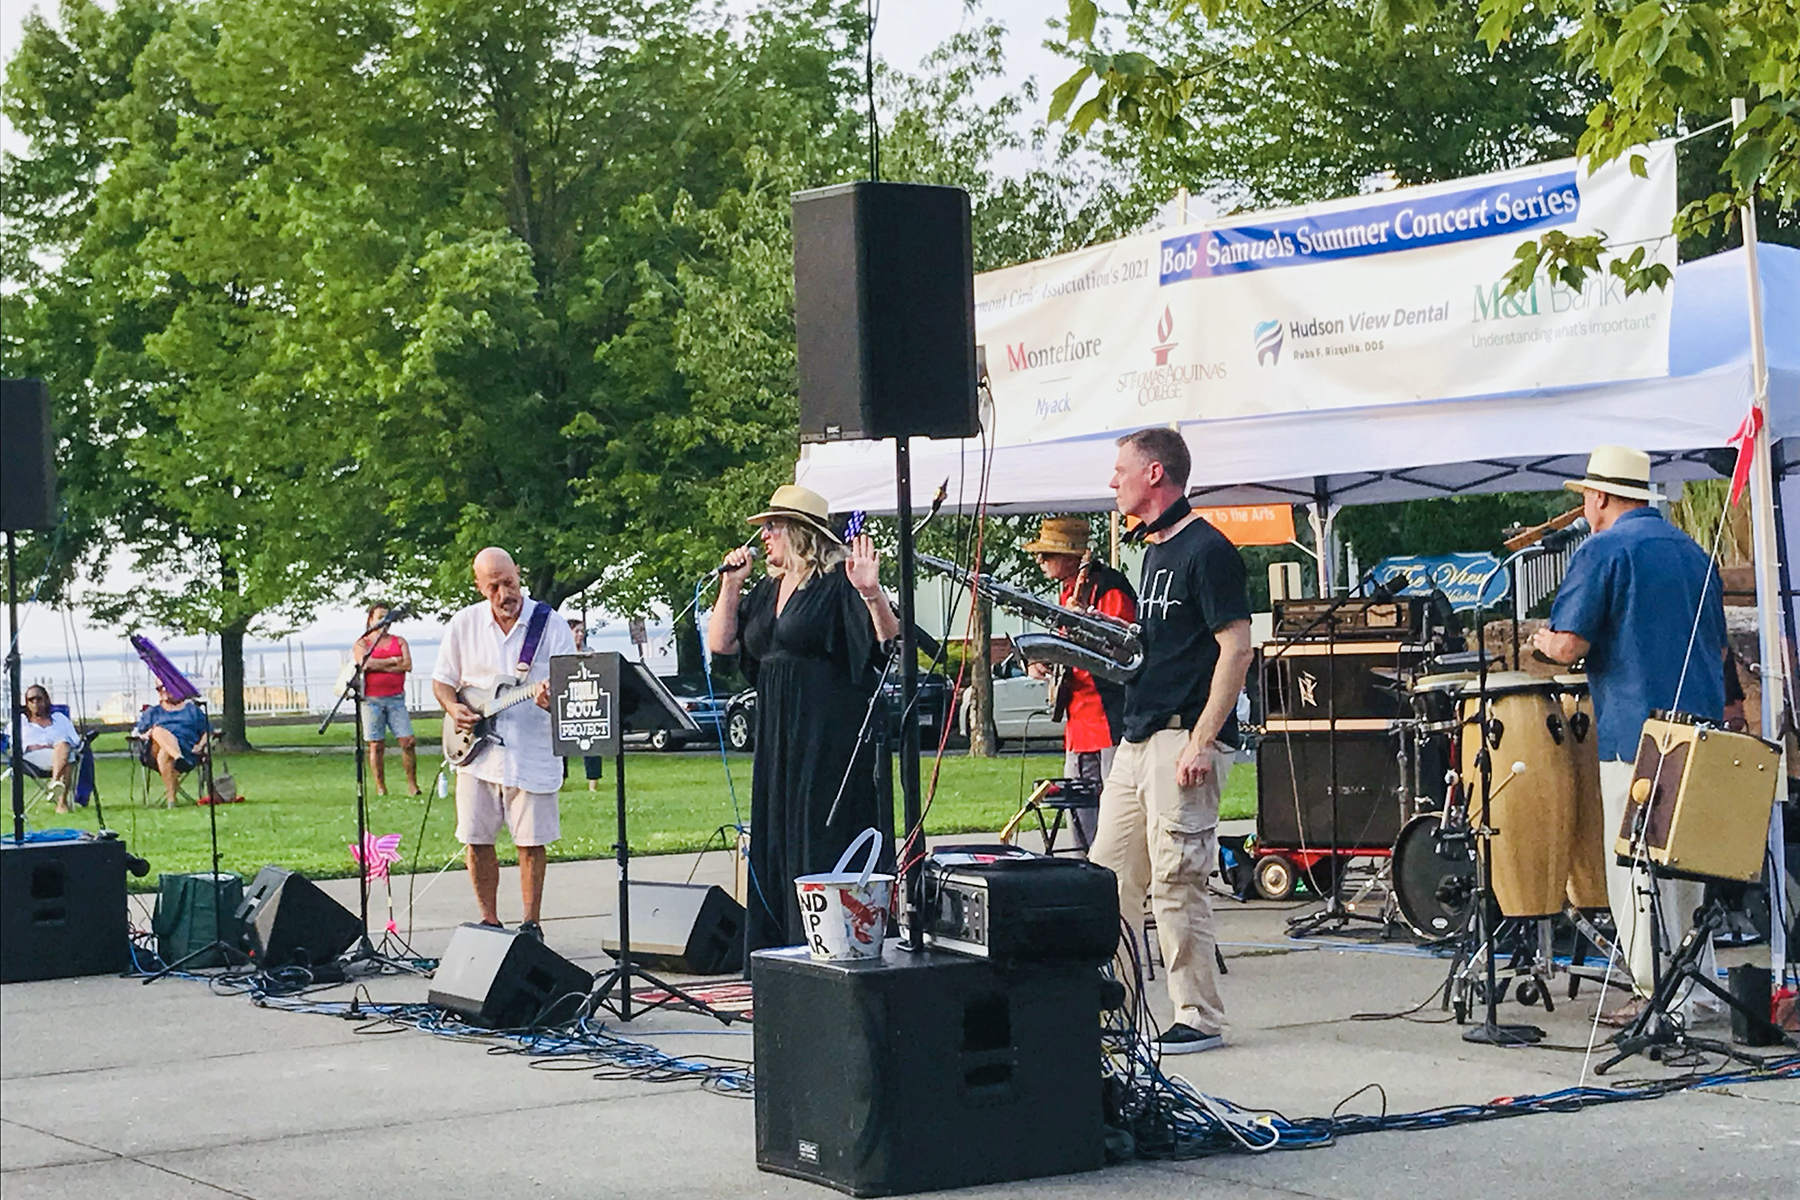 This was the scene one Thursday night last summer at the Piermont Civic Association’s Bob Samuels Summer Concert Series.